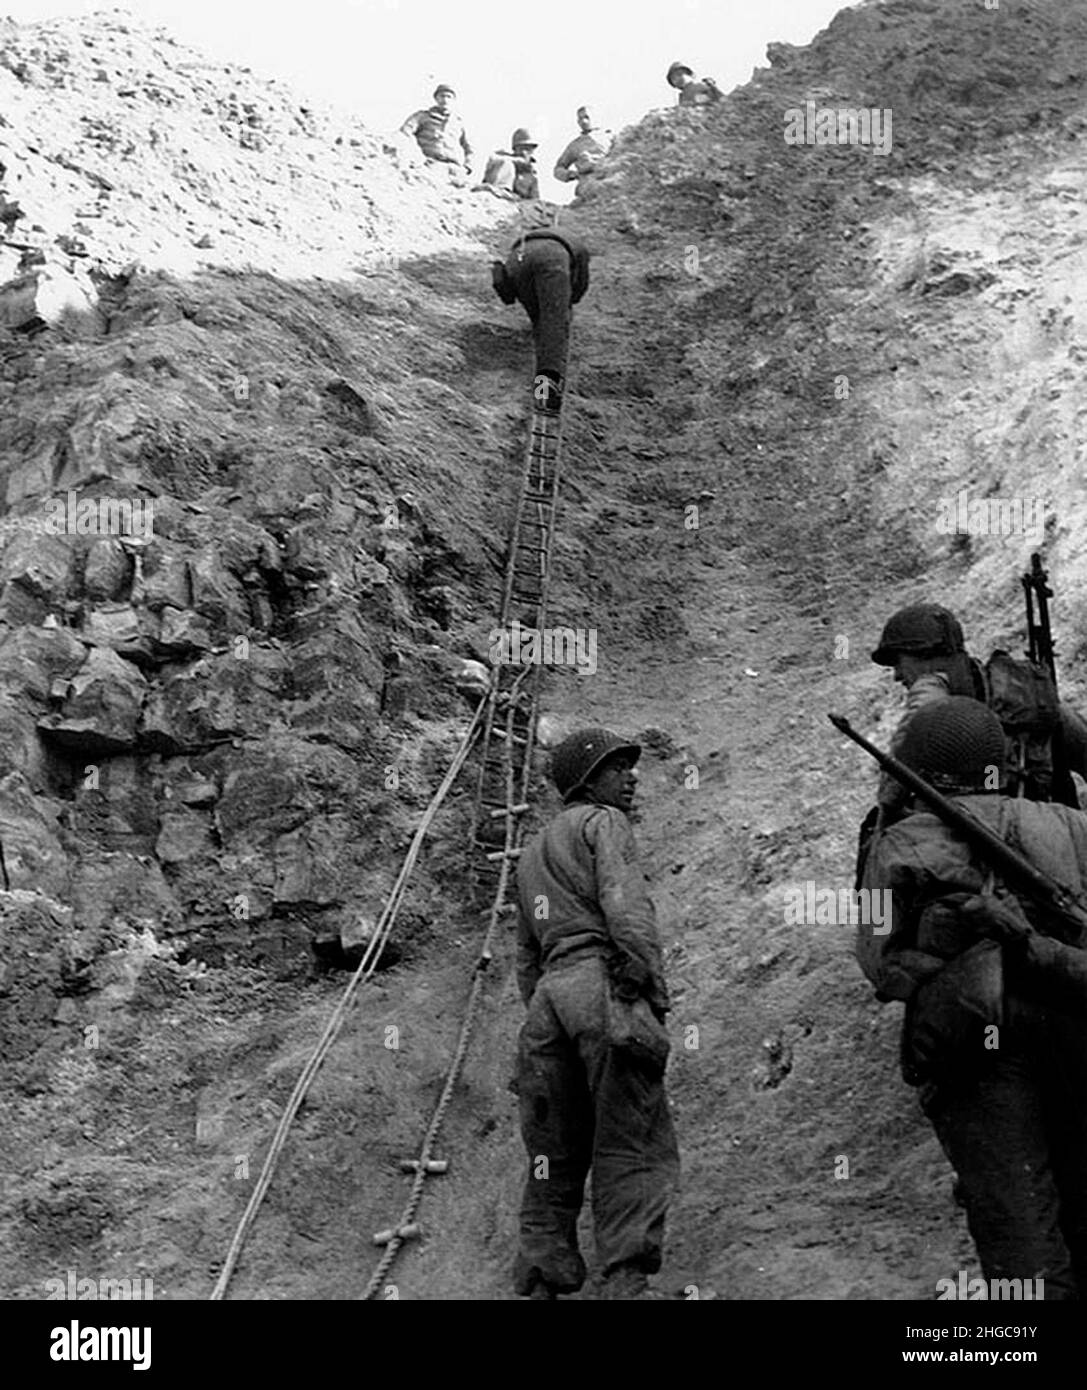 US Rangers climbing the cliffs at Pointe du Hoc, Omaha Beach during the D-Day landings Stock Photo